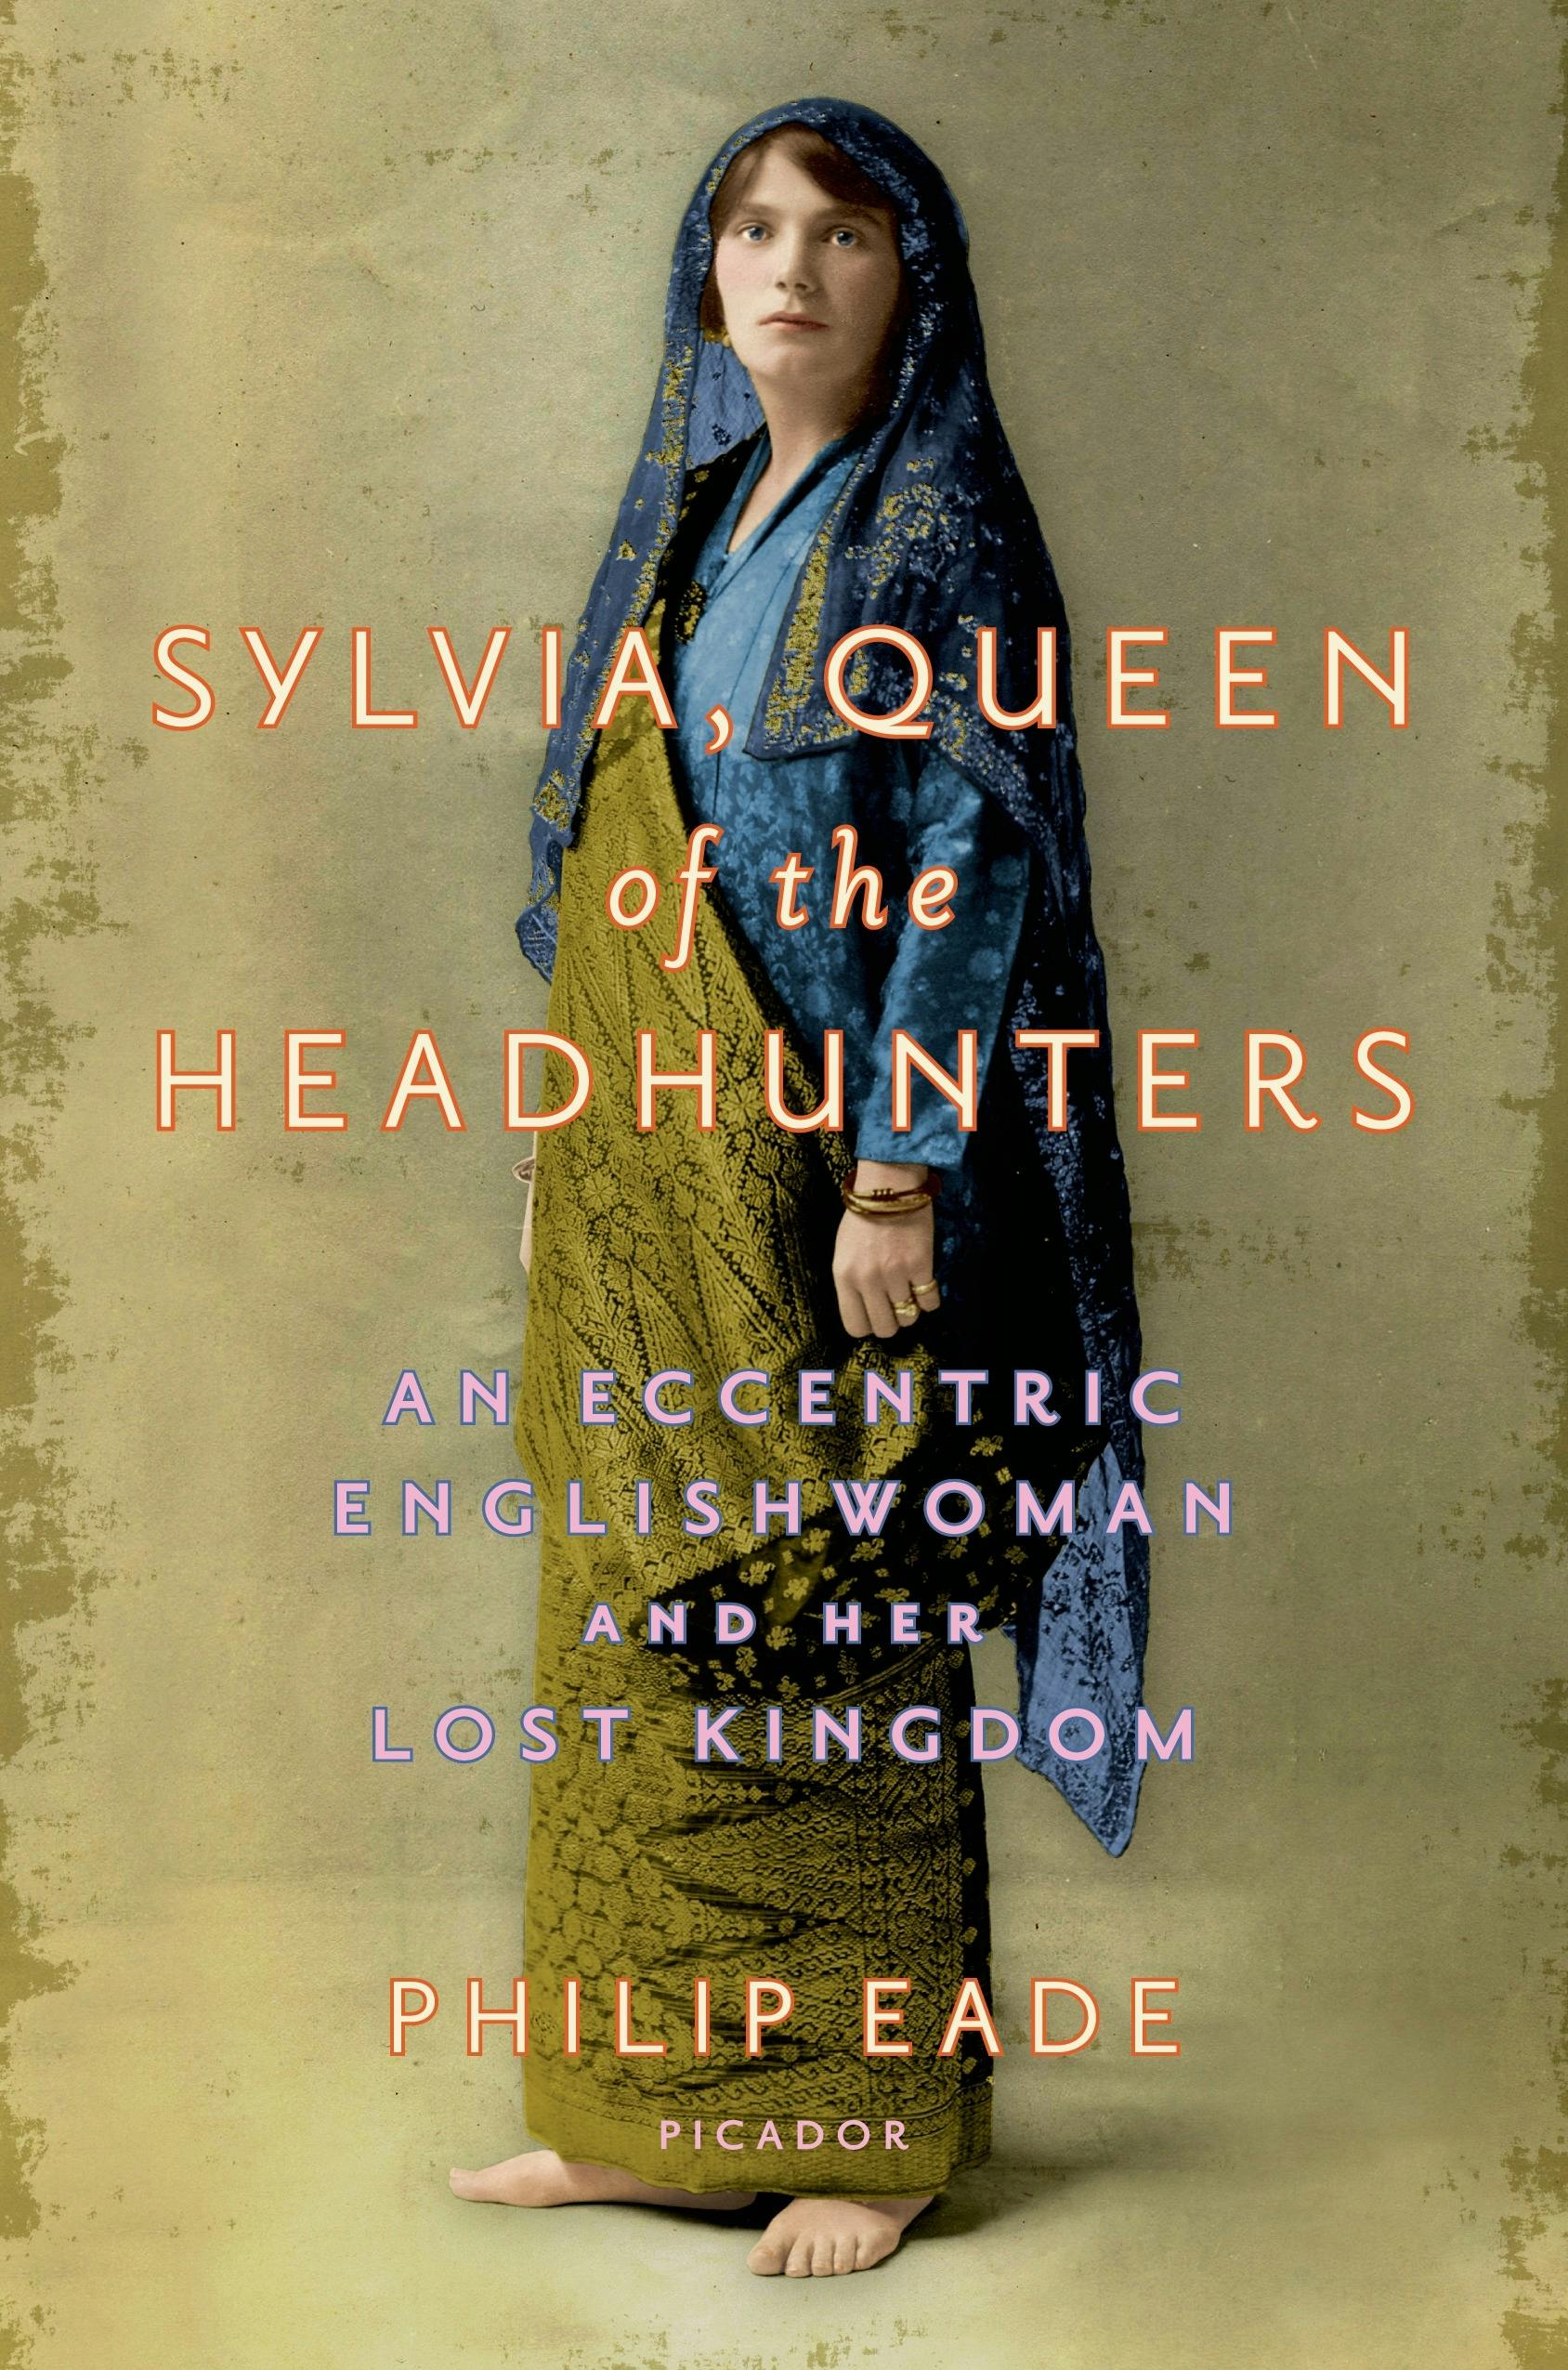 Sylvia, Queen of the Headhunters